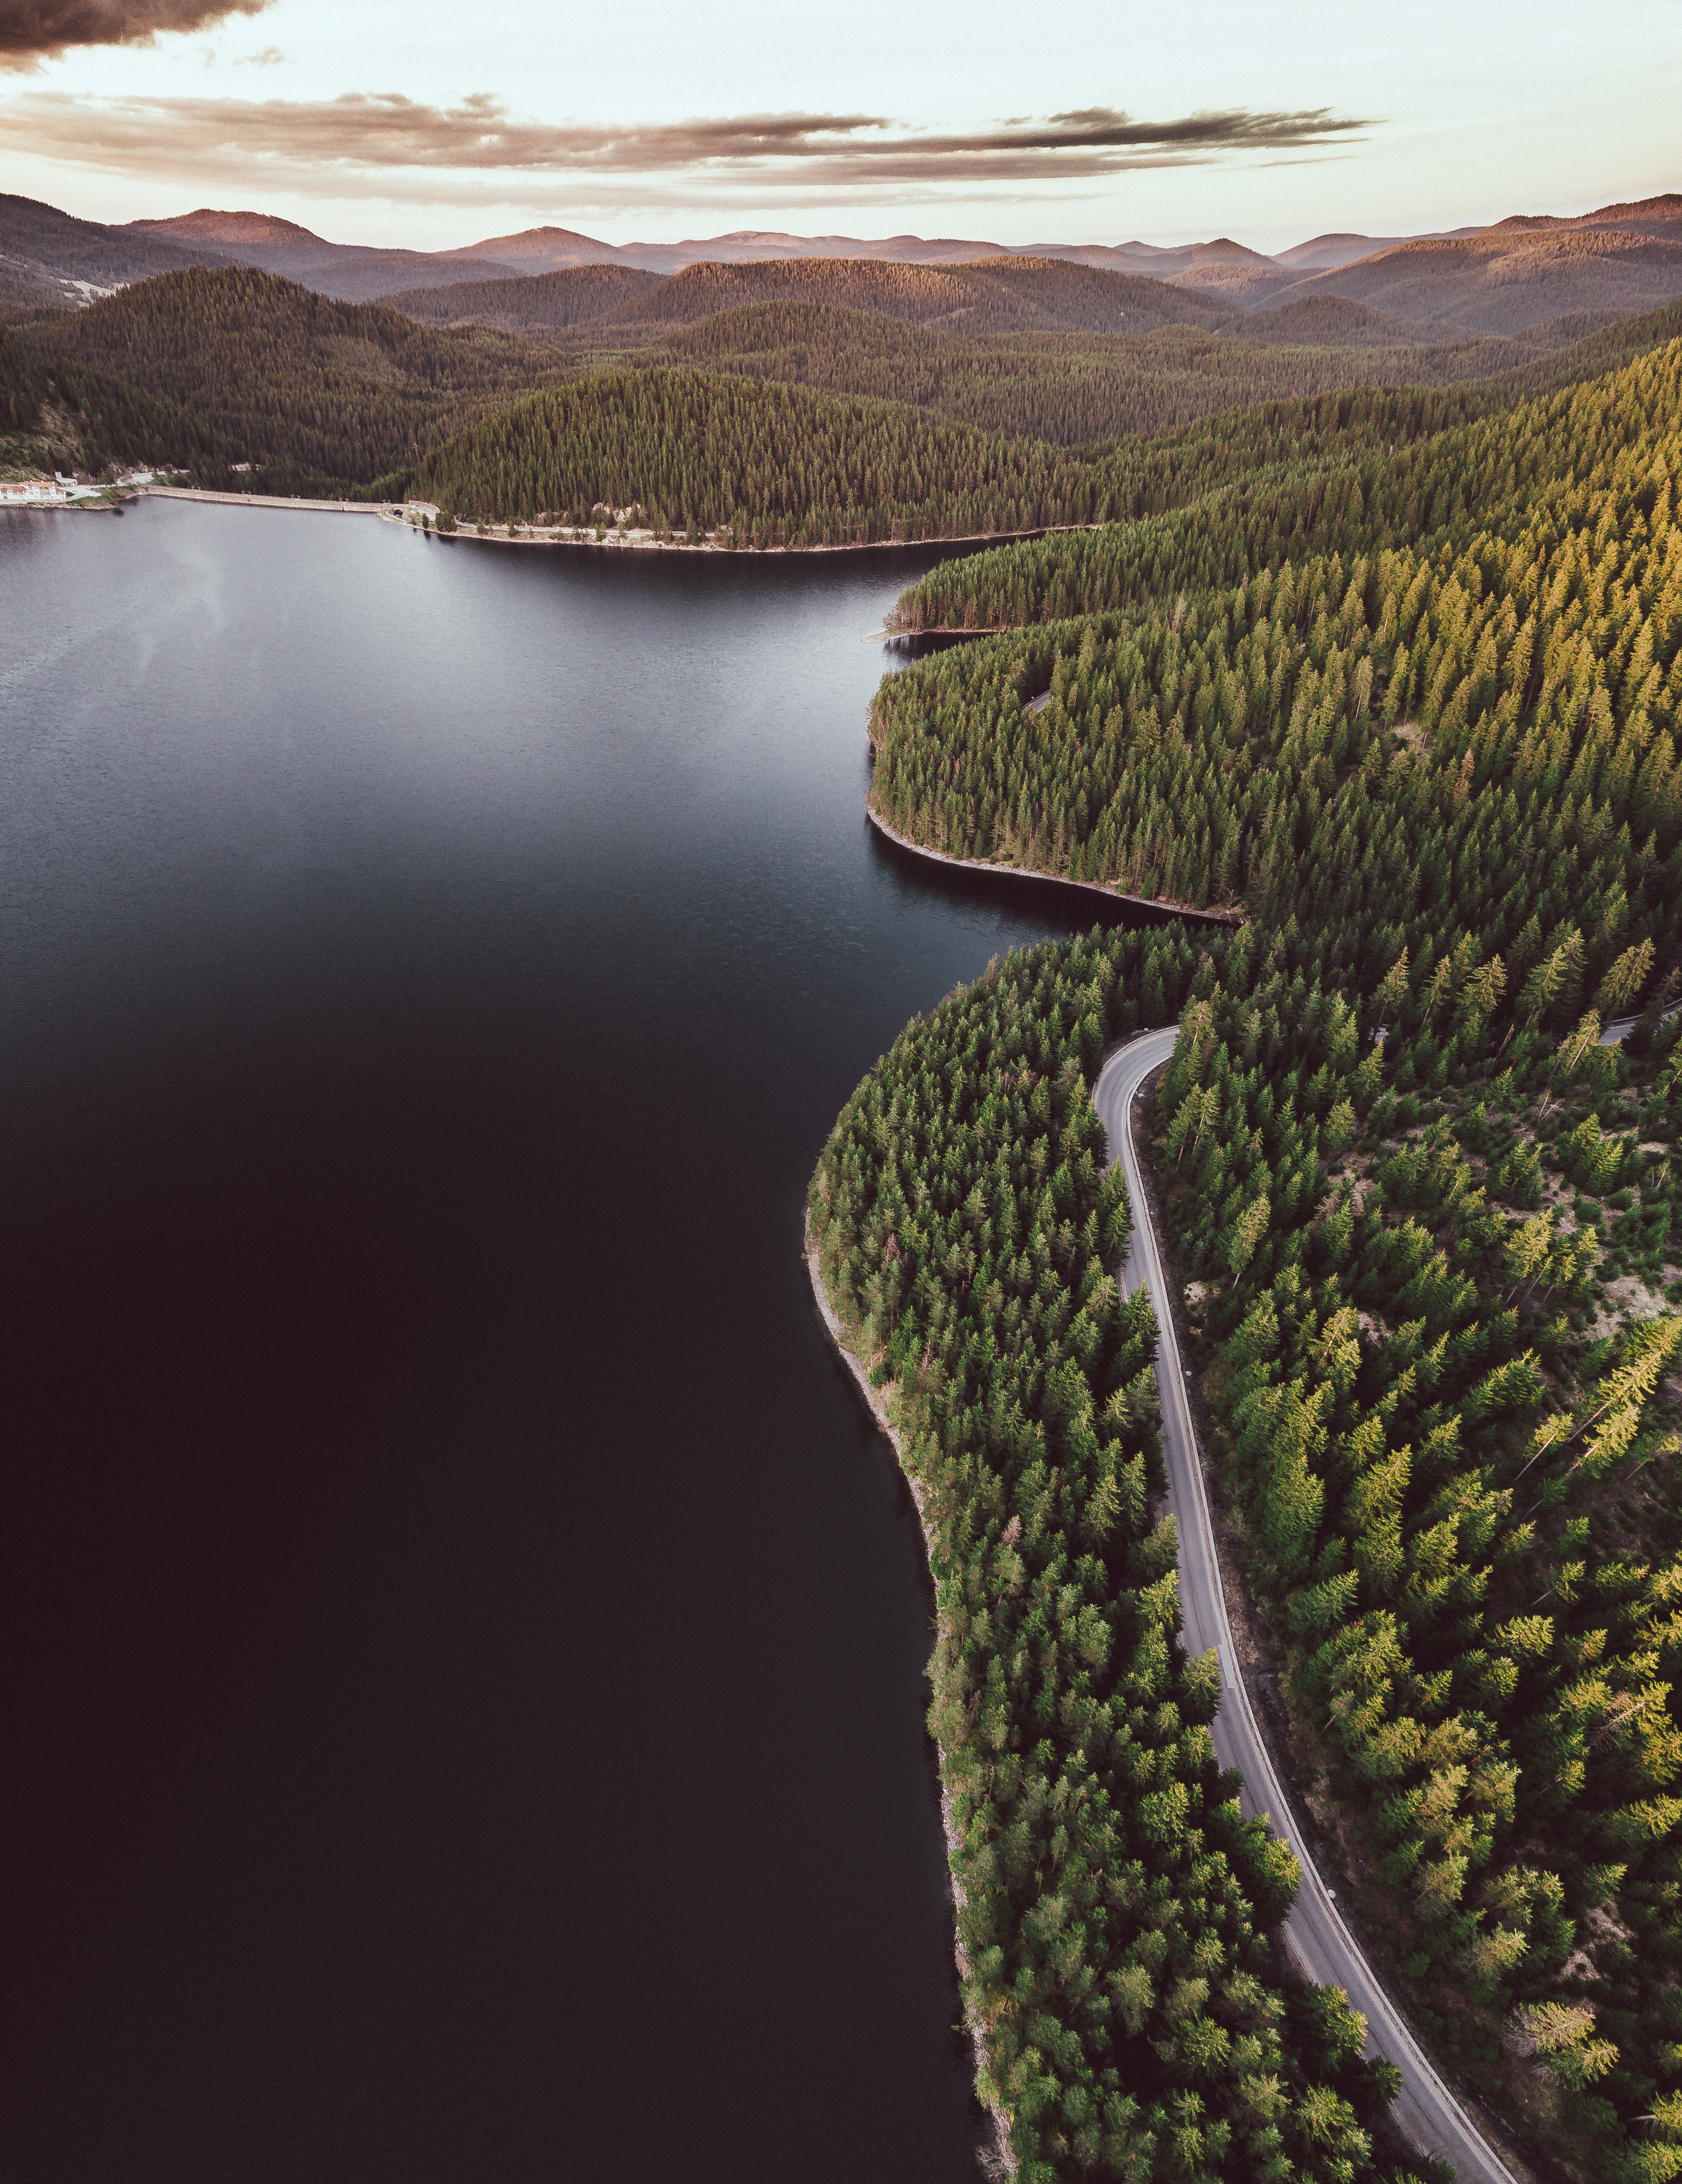 shore, nature, view from above, lake, bank, road, forest, hills images